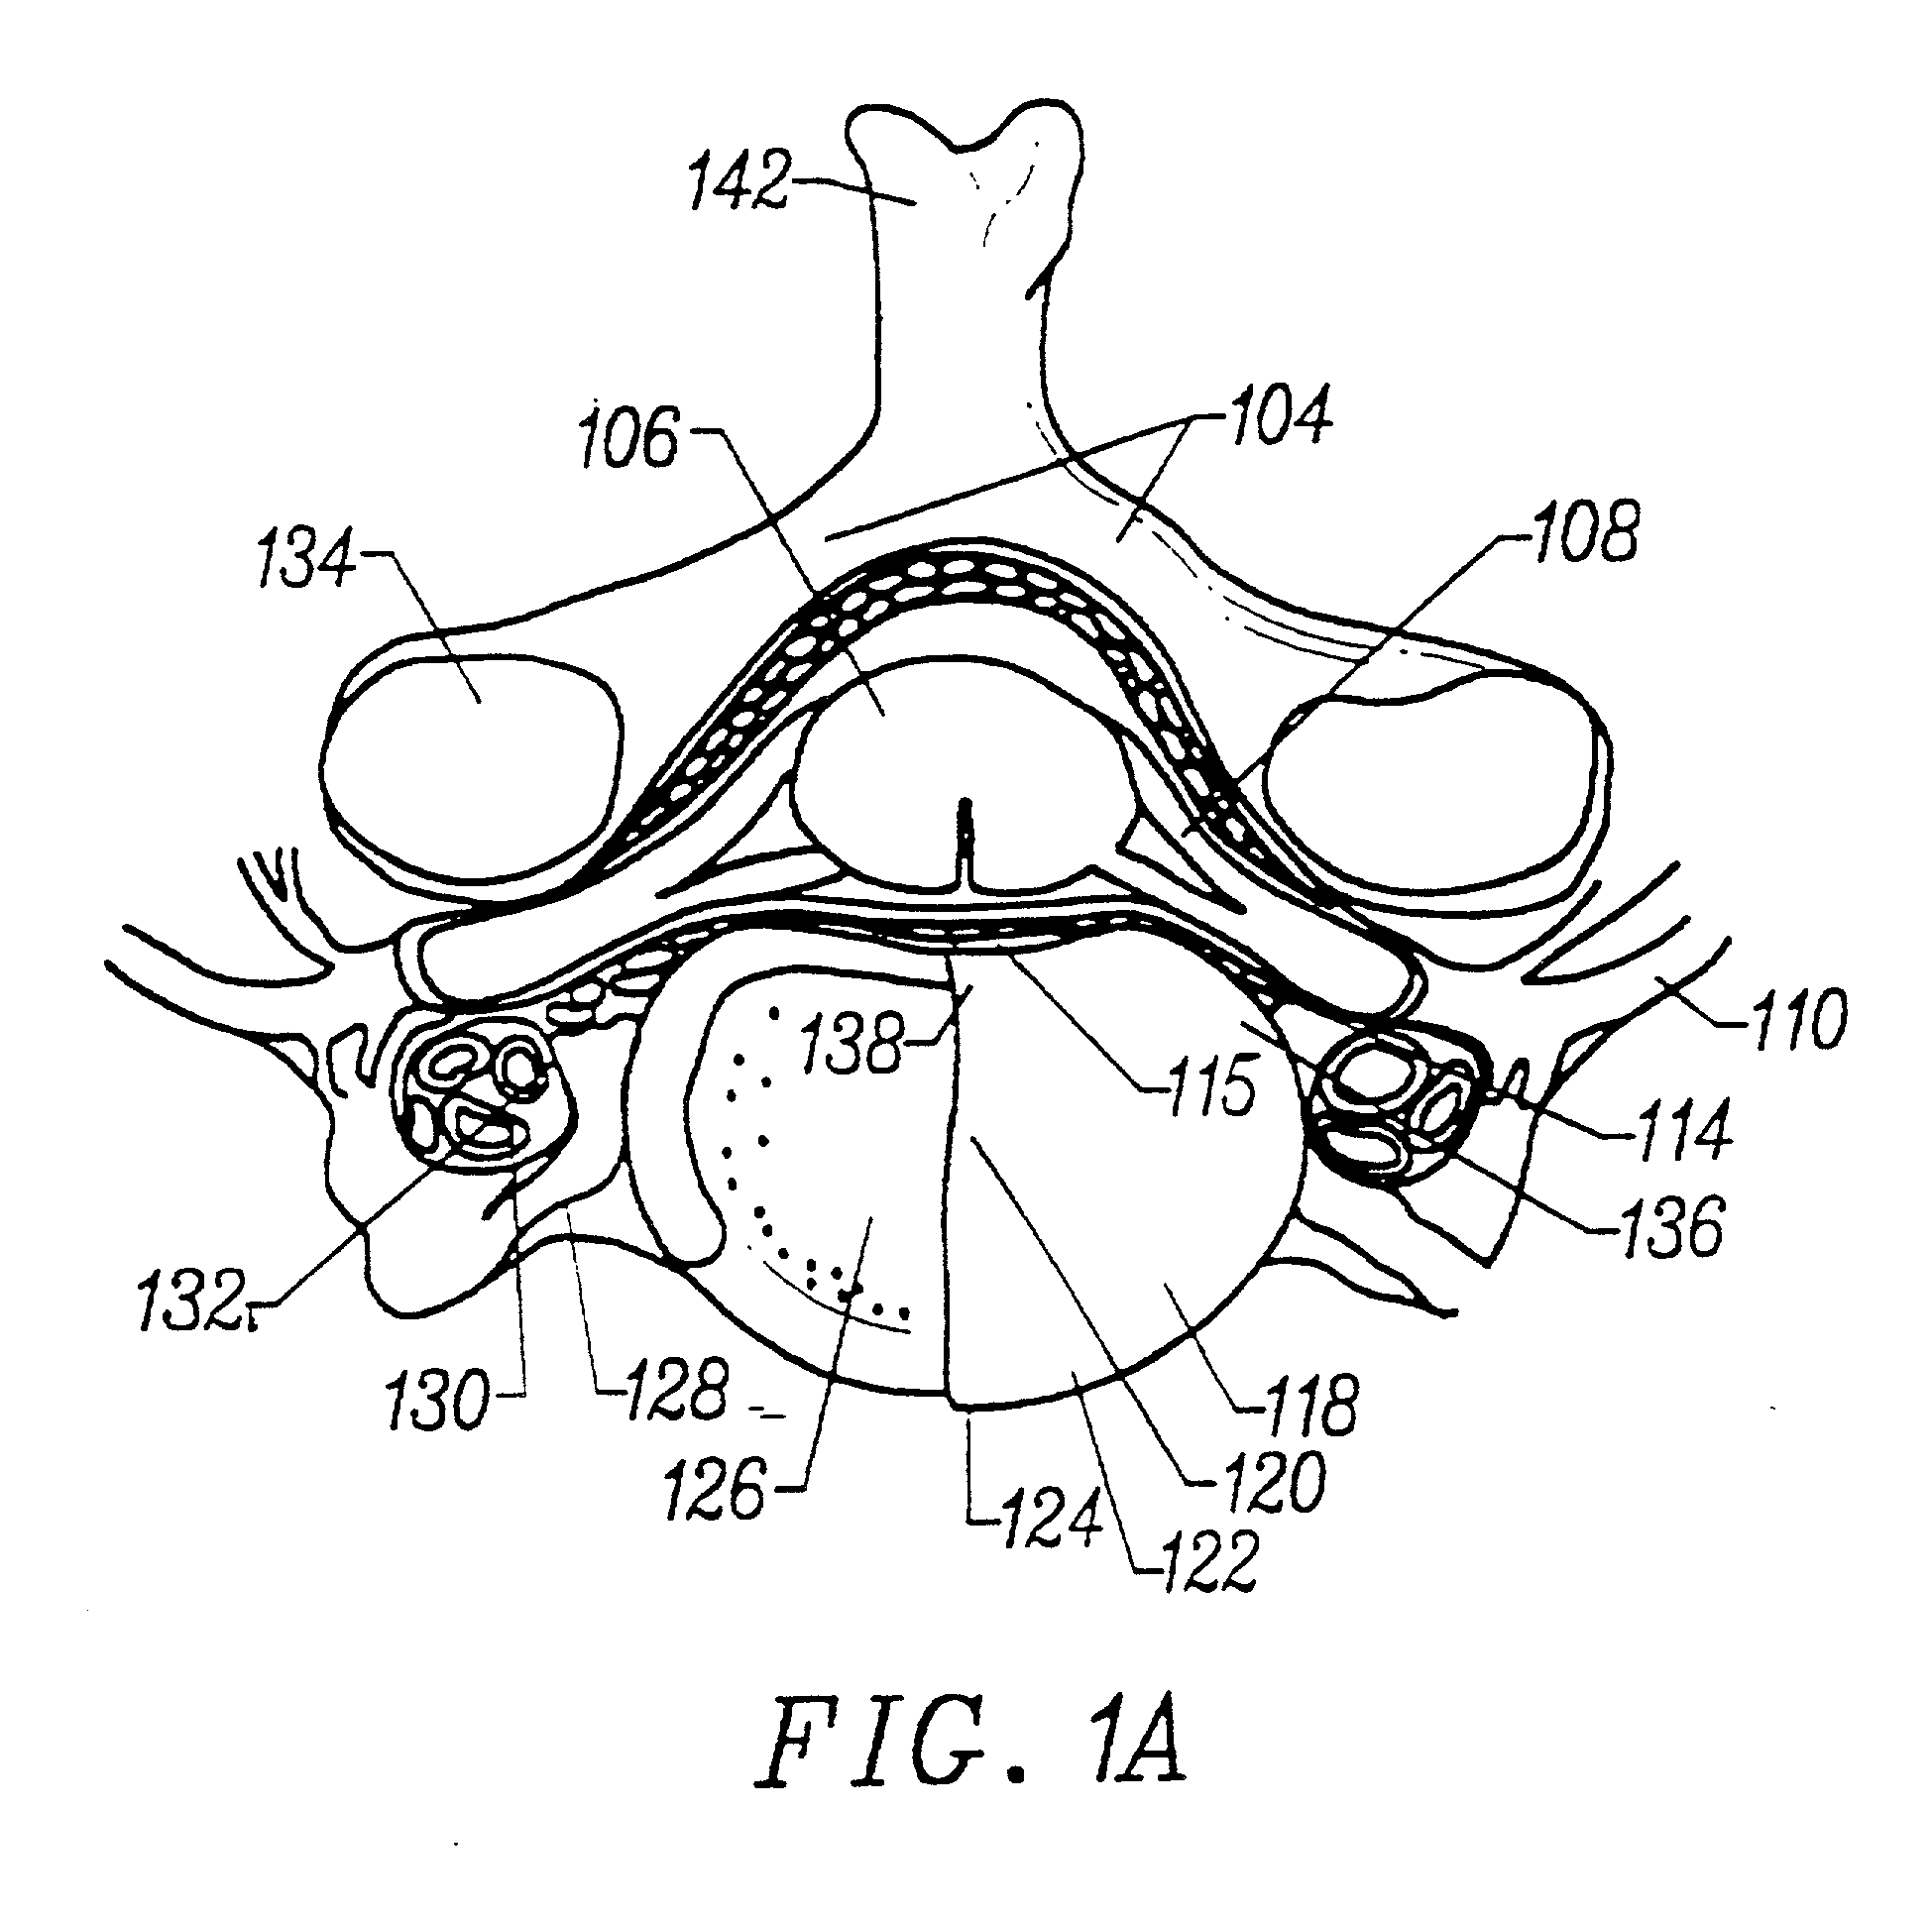 Apparatus and method for accessing and performing a function within an intervertebral disc